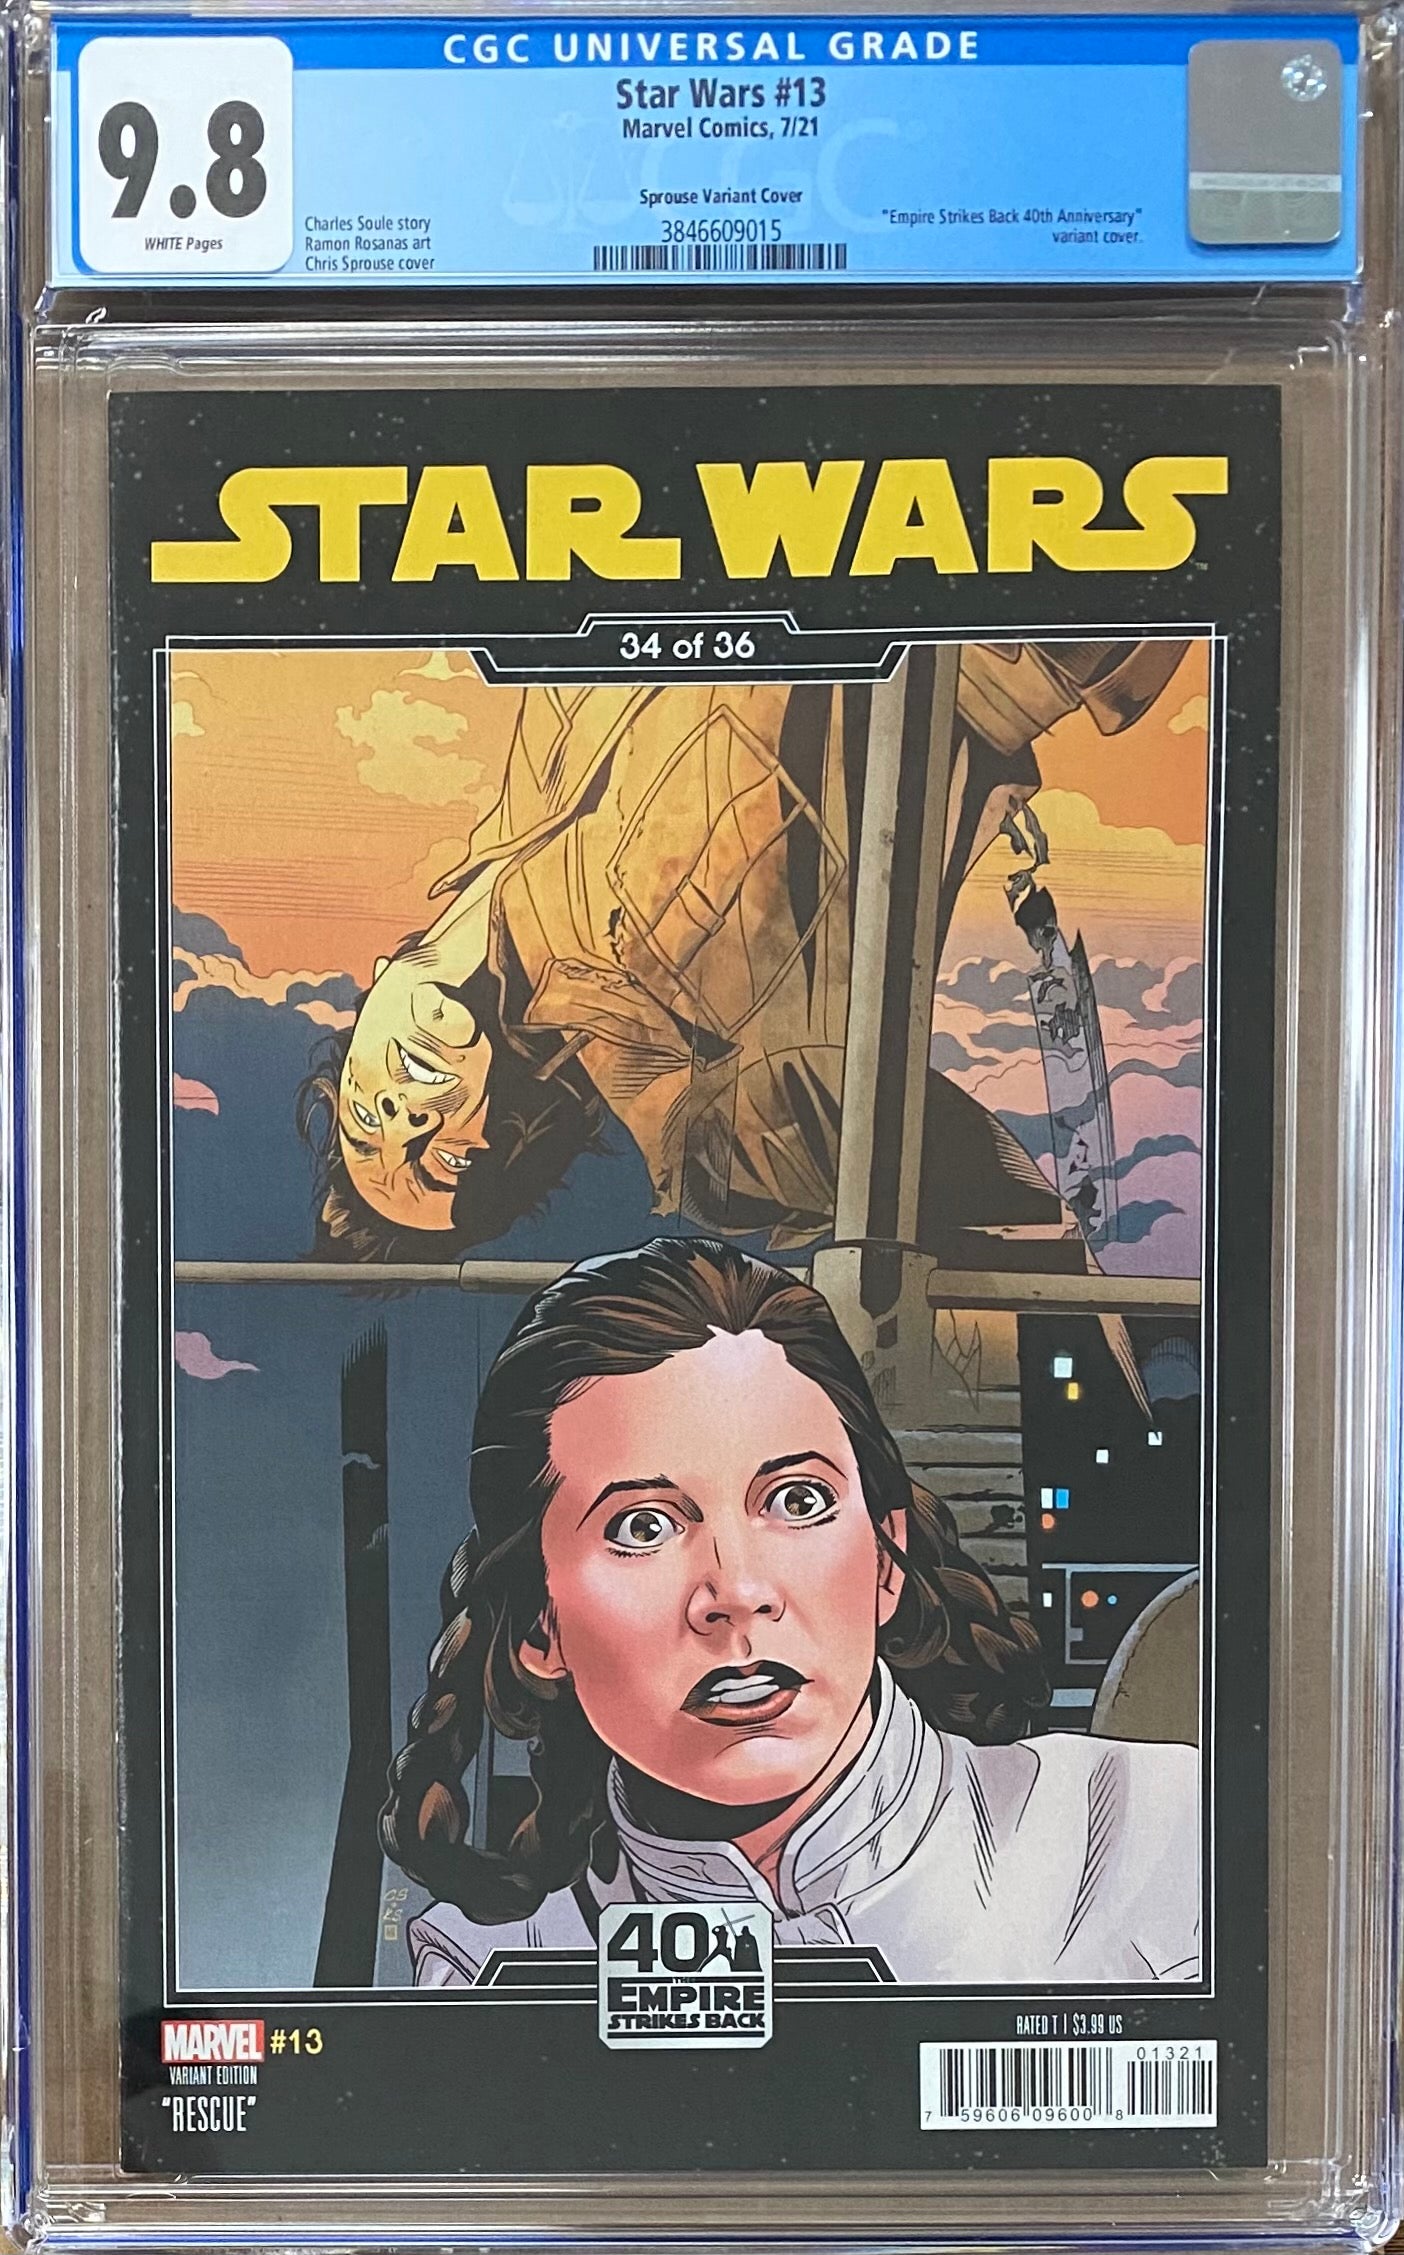 Star Wars #13 Sprouse Variant CGC 9.8 - War of the Bounty Hunters